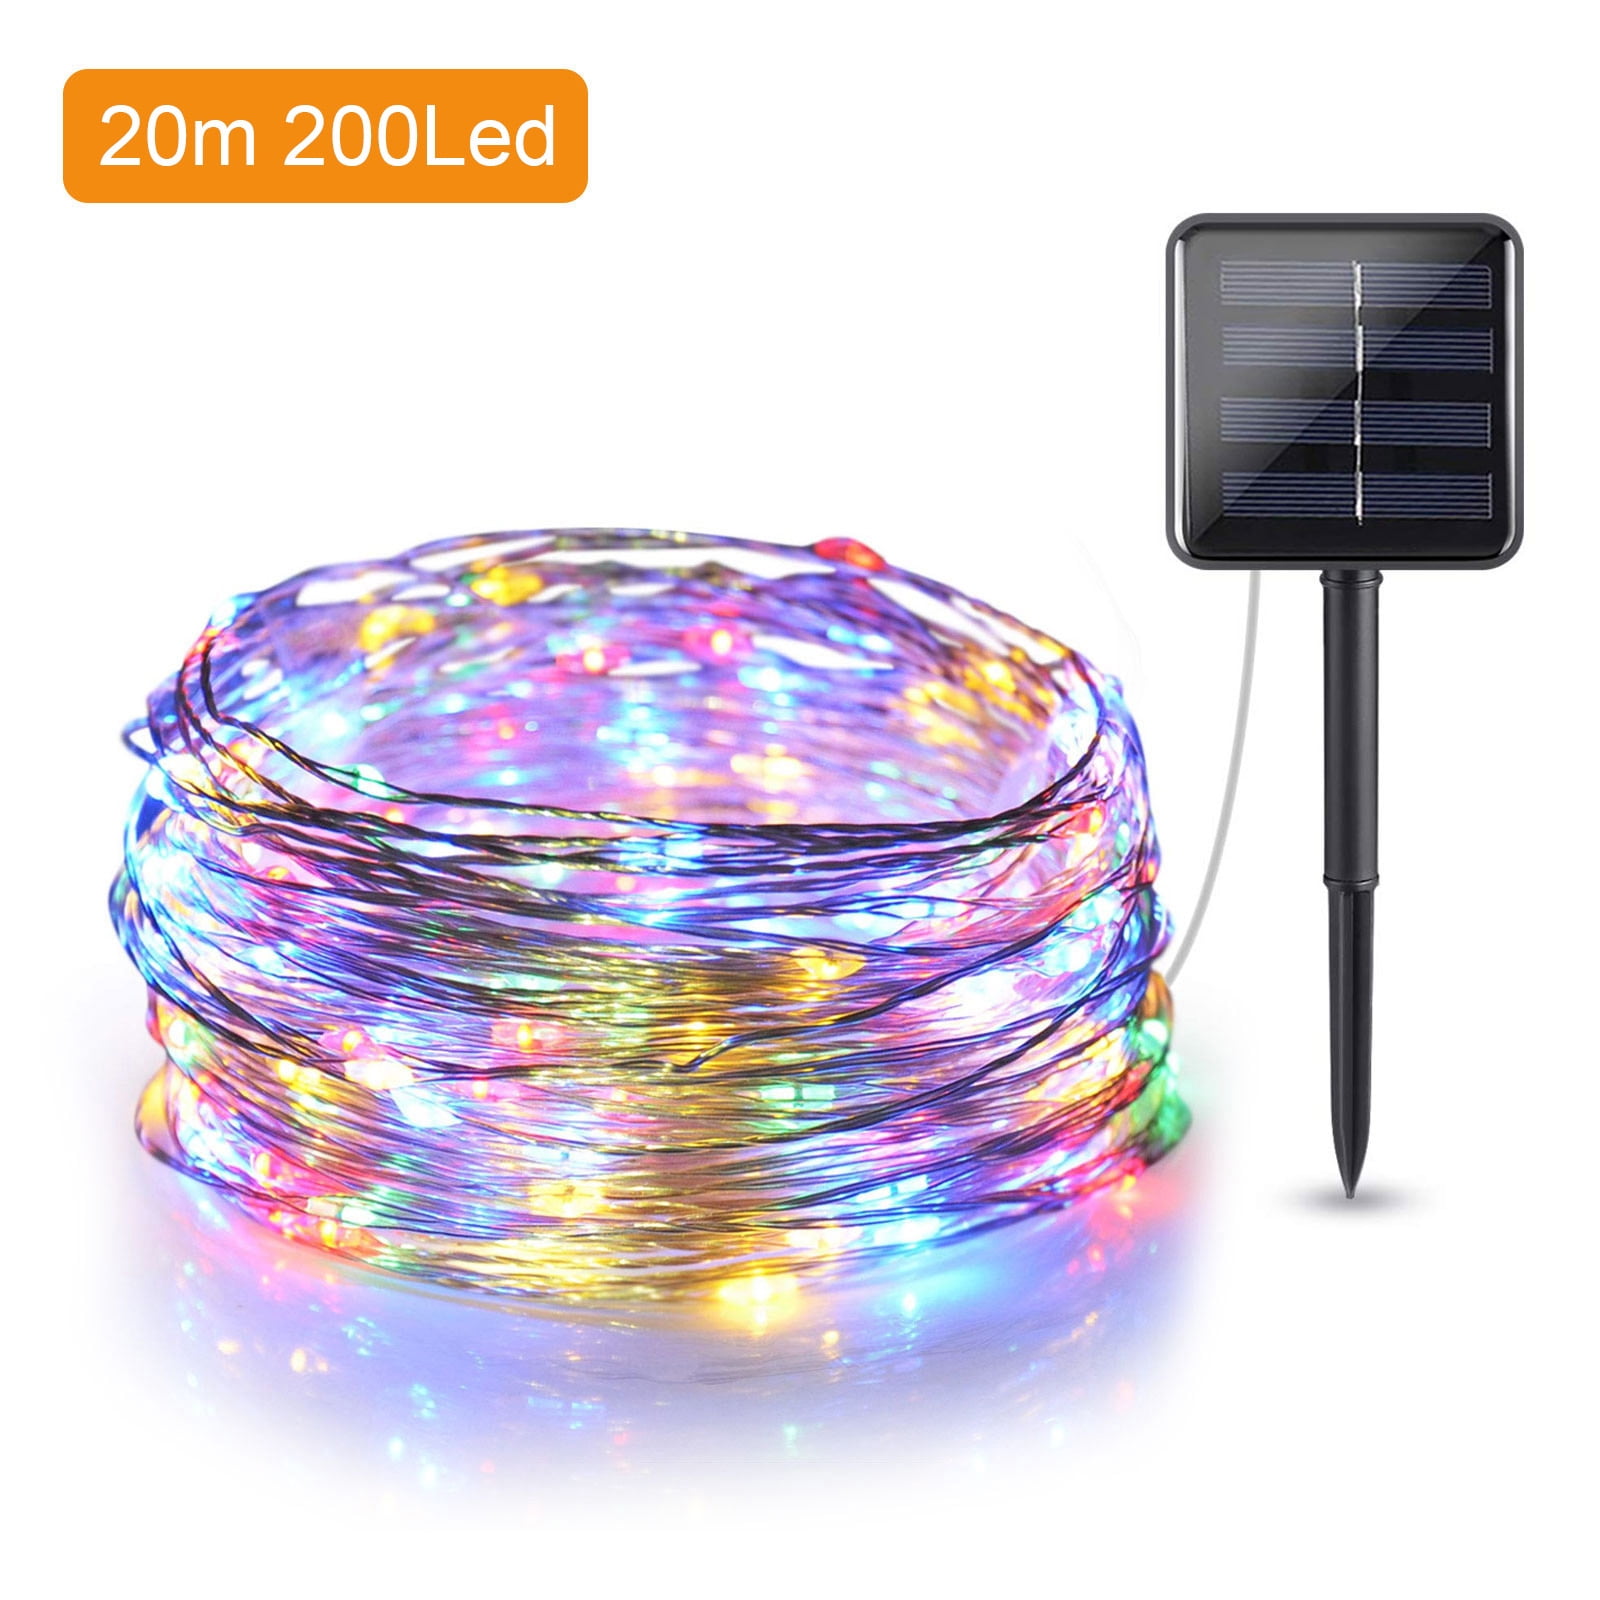 Details about   100/200LED Solar Fairy String Lights Copper Wire Outdoor Party Xmas Garden Decor 